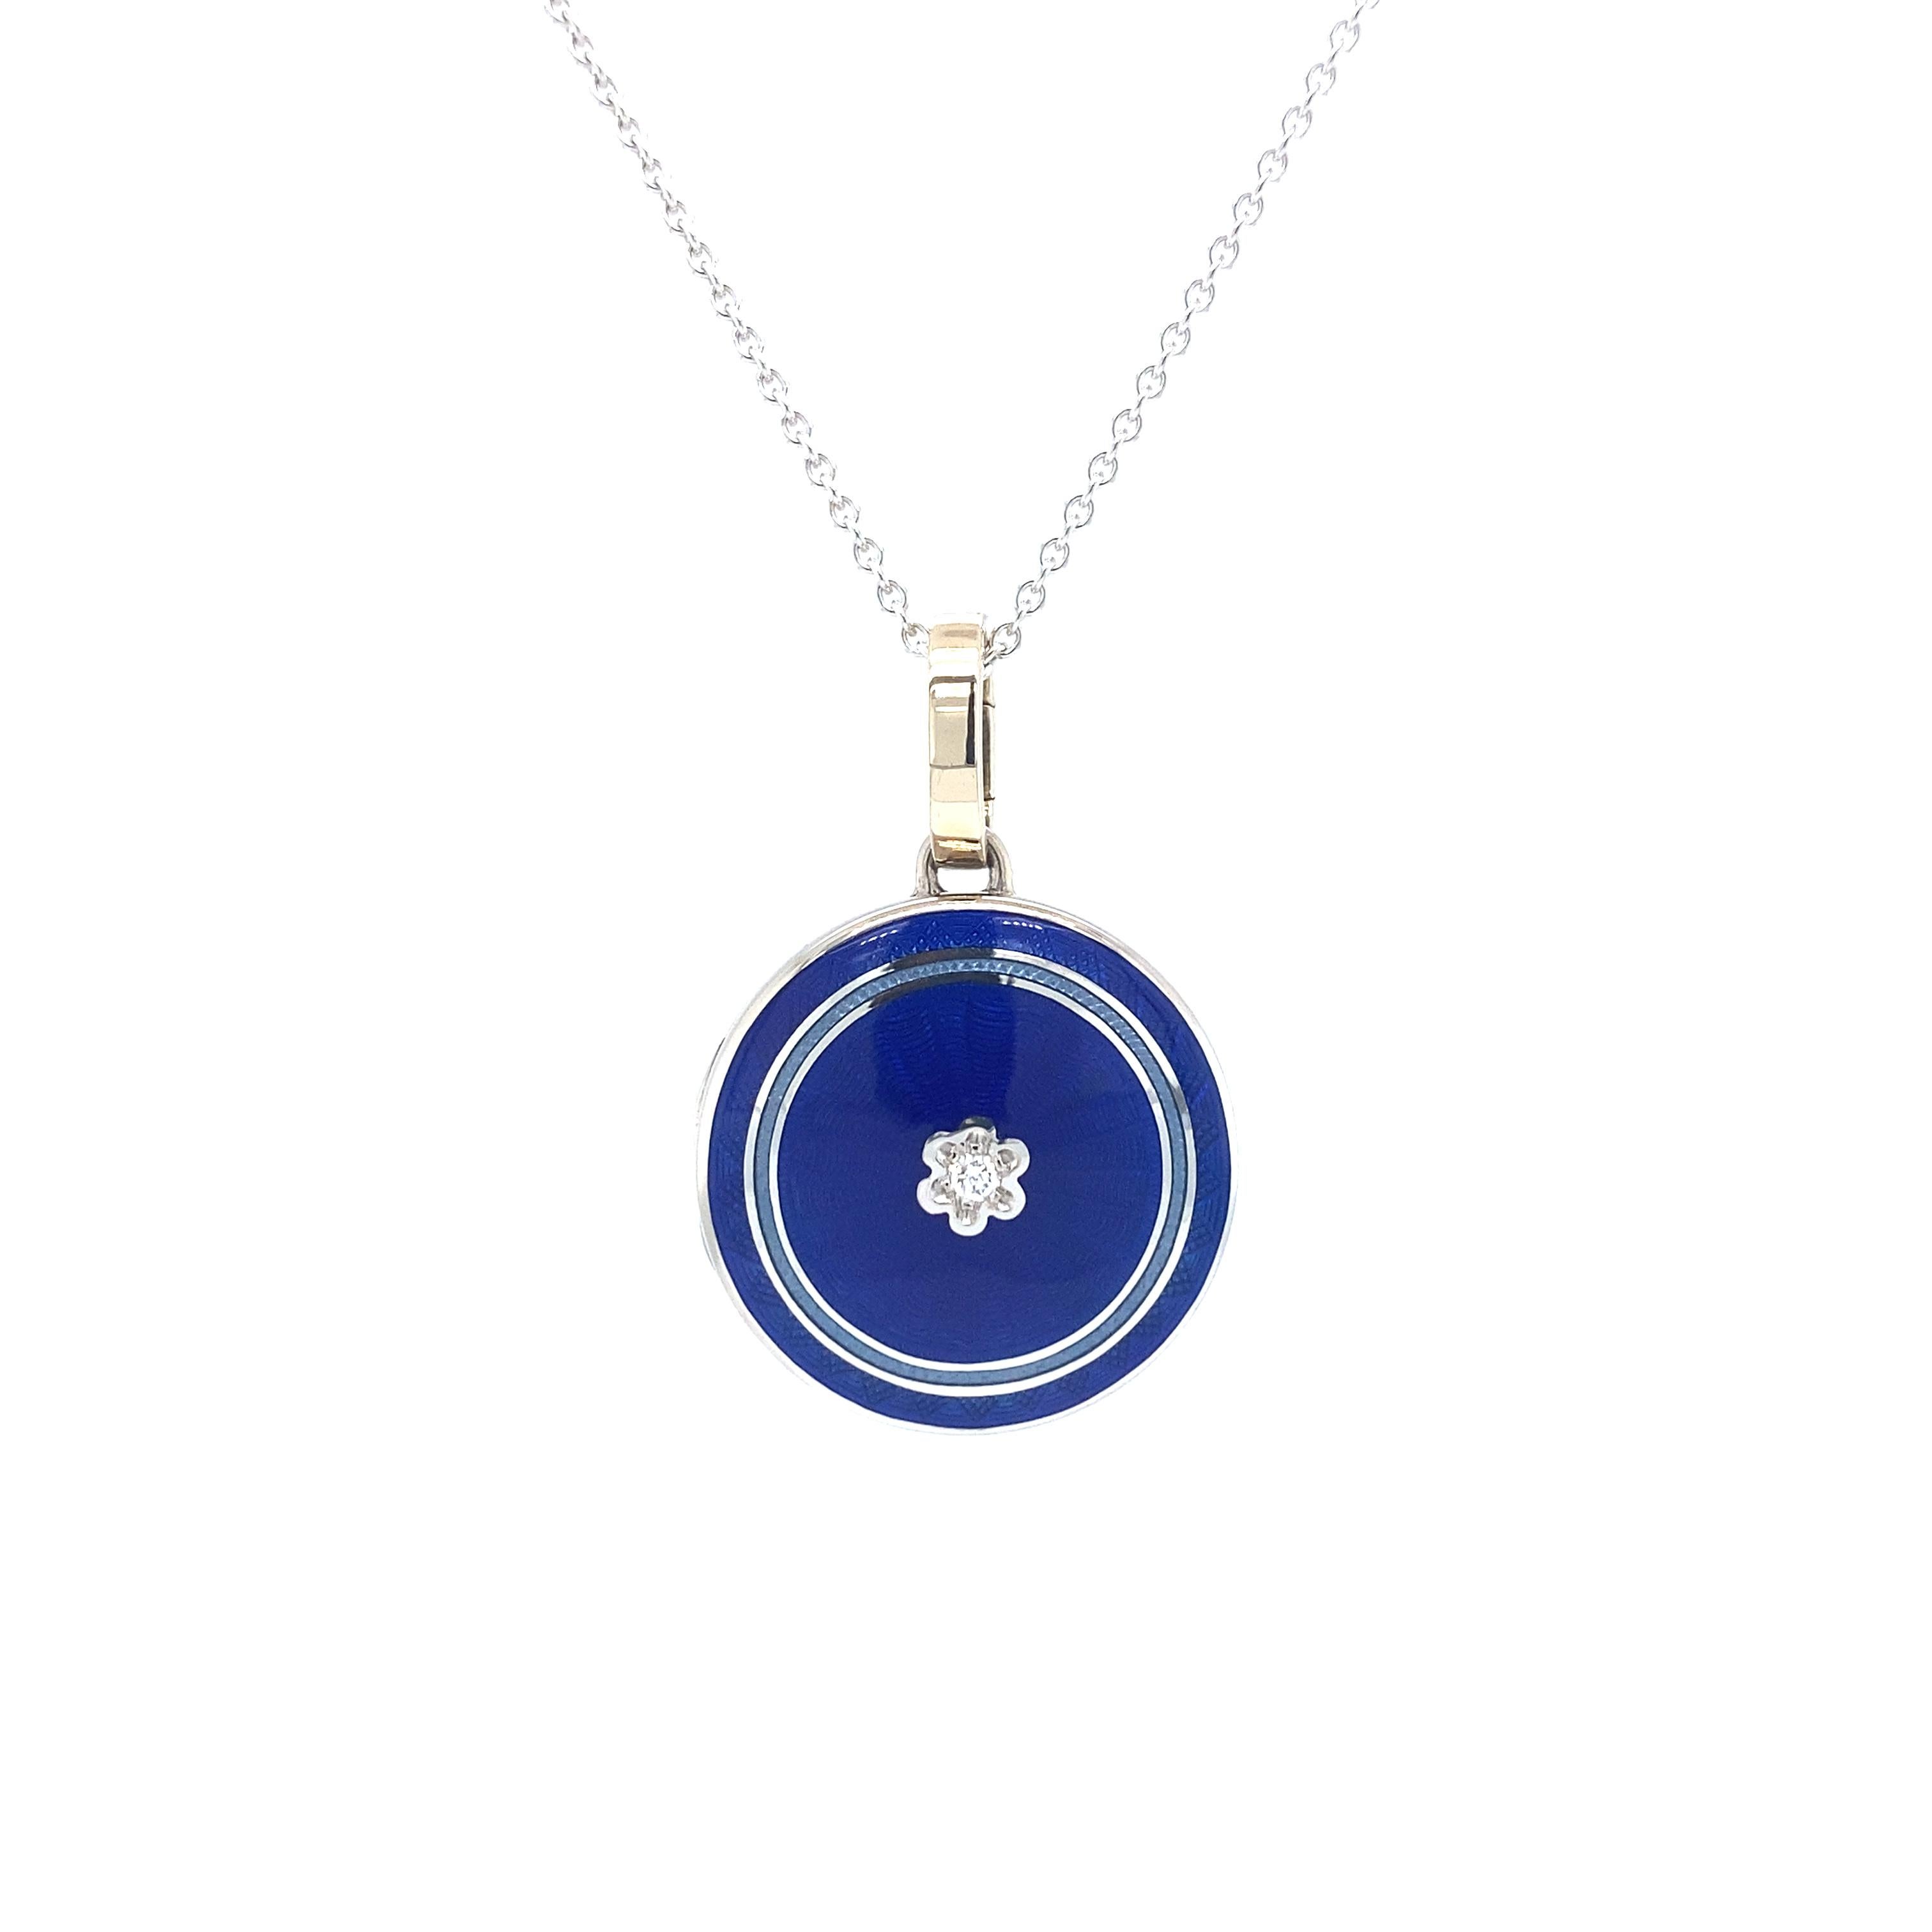 Victor Mayer round locket pendant necklace in 18k white gold with royal blue vitreous enamel and 1 brilliant cut diamond total 0.03 ct, H VS

About the creator Victor Mayer 
Victor Mayer is internationally renowned for elegant timeless designs and